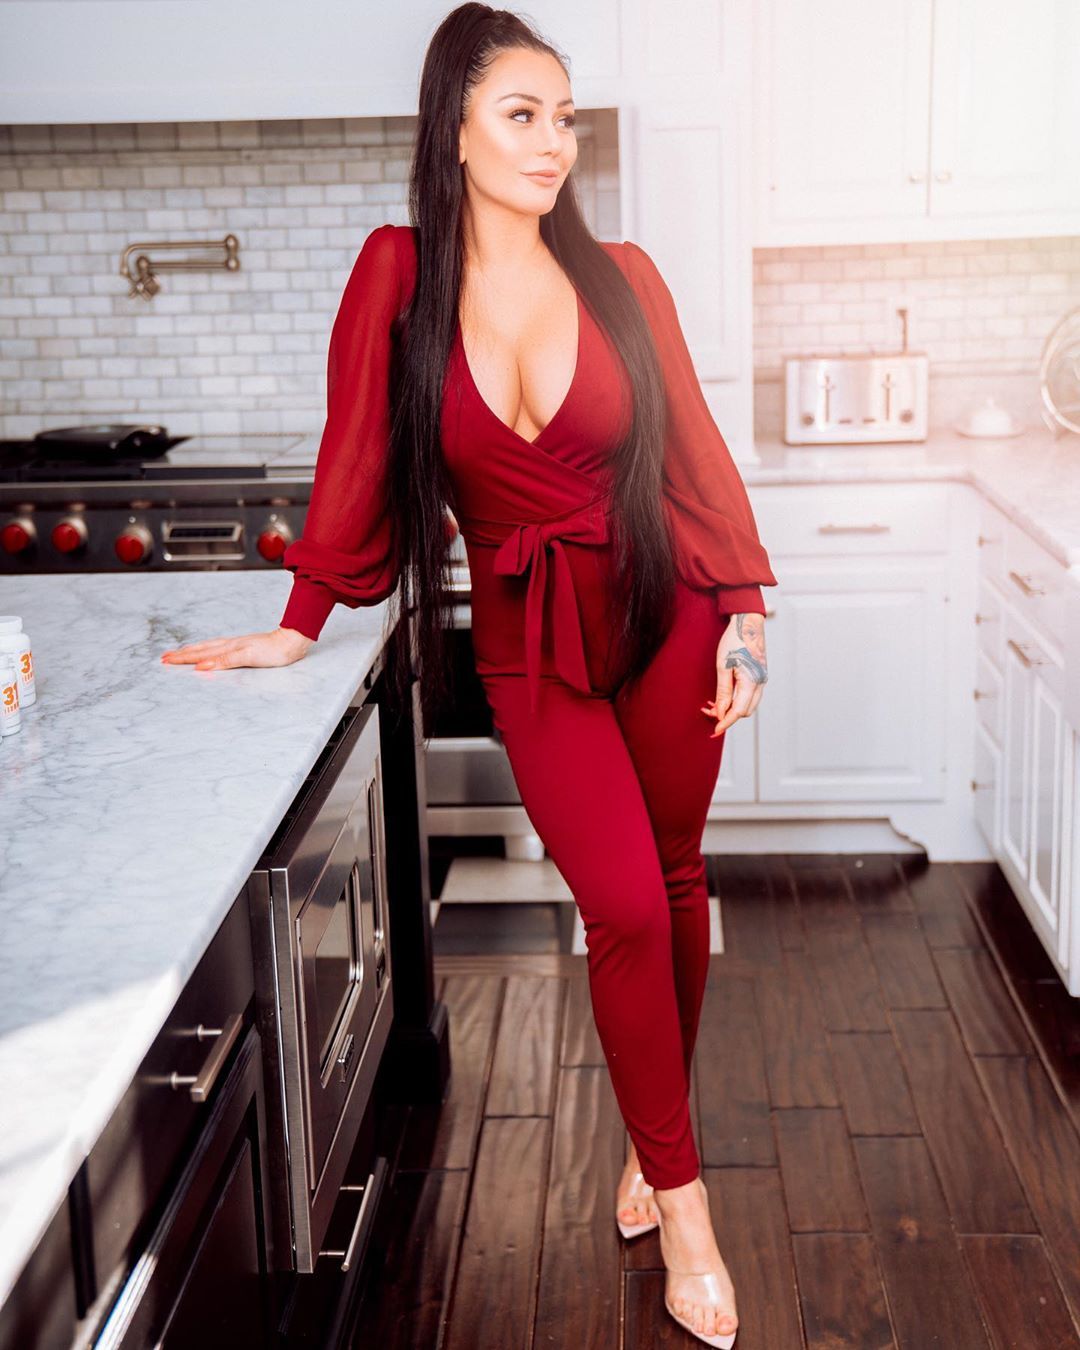 Jersey Shore Star Jwoww Stuns With Her Quarantine Fitness Check 